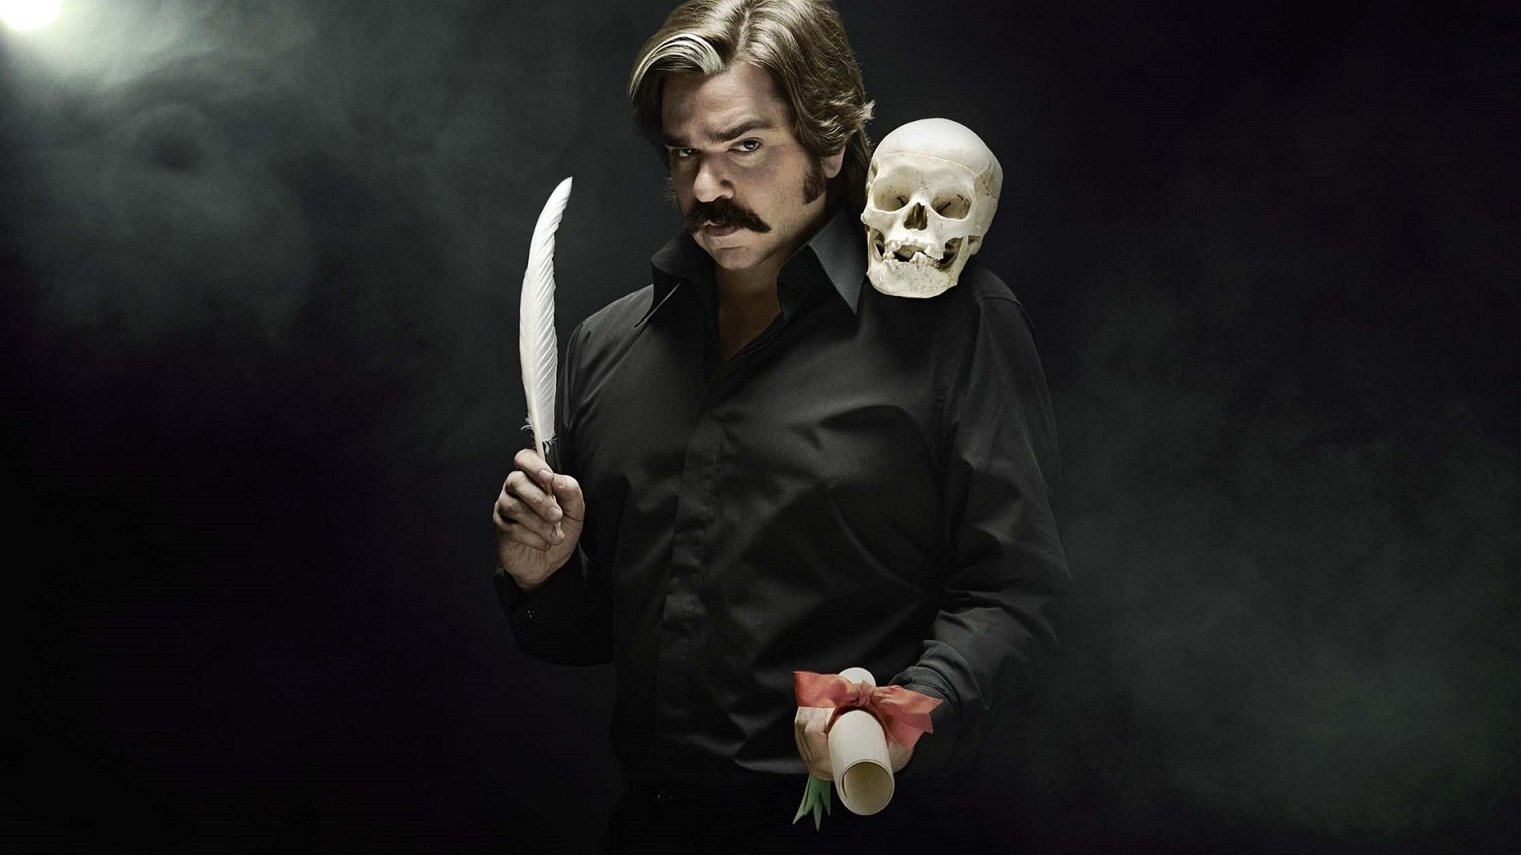 what time does Toast of London come on